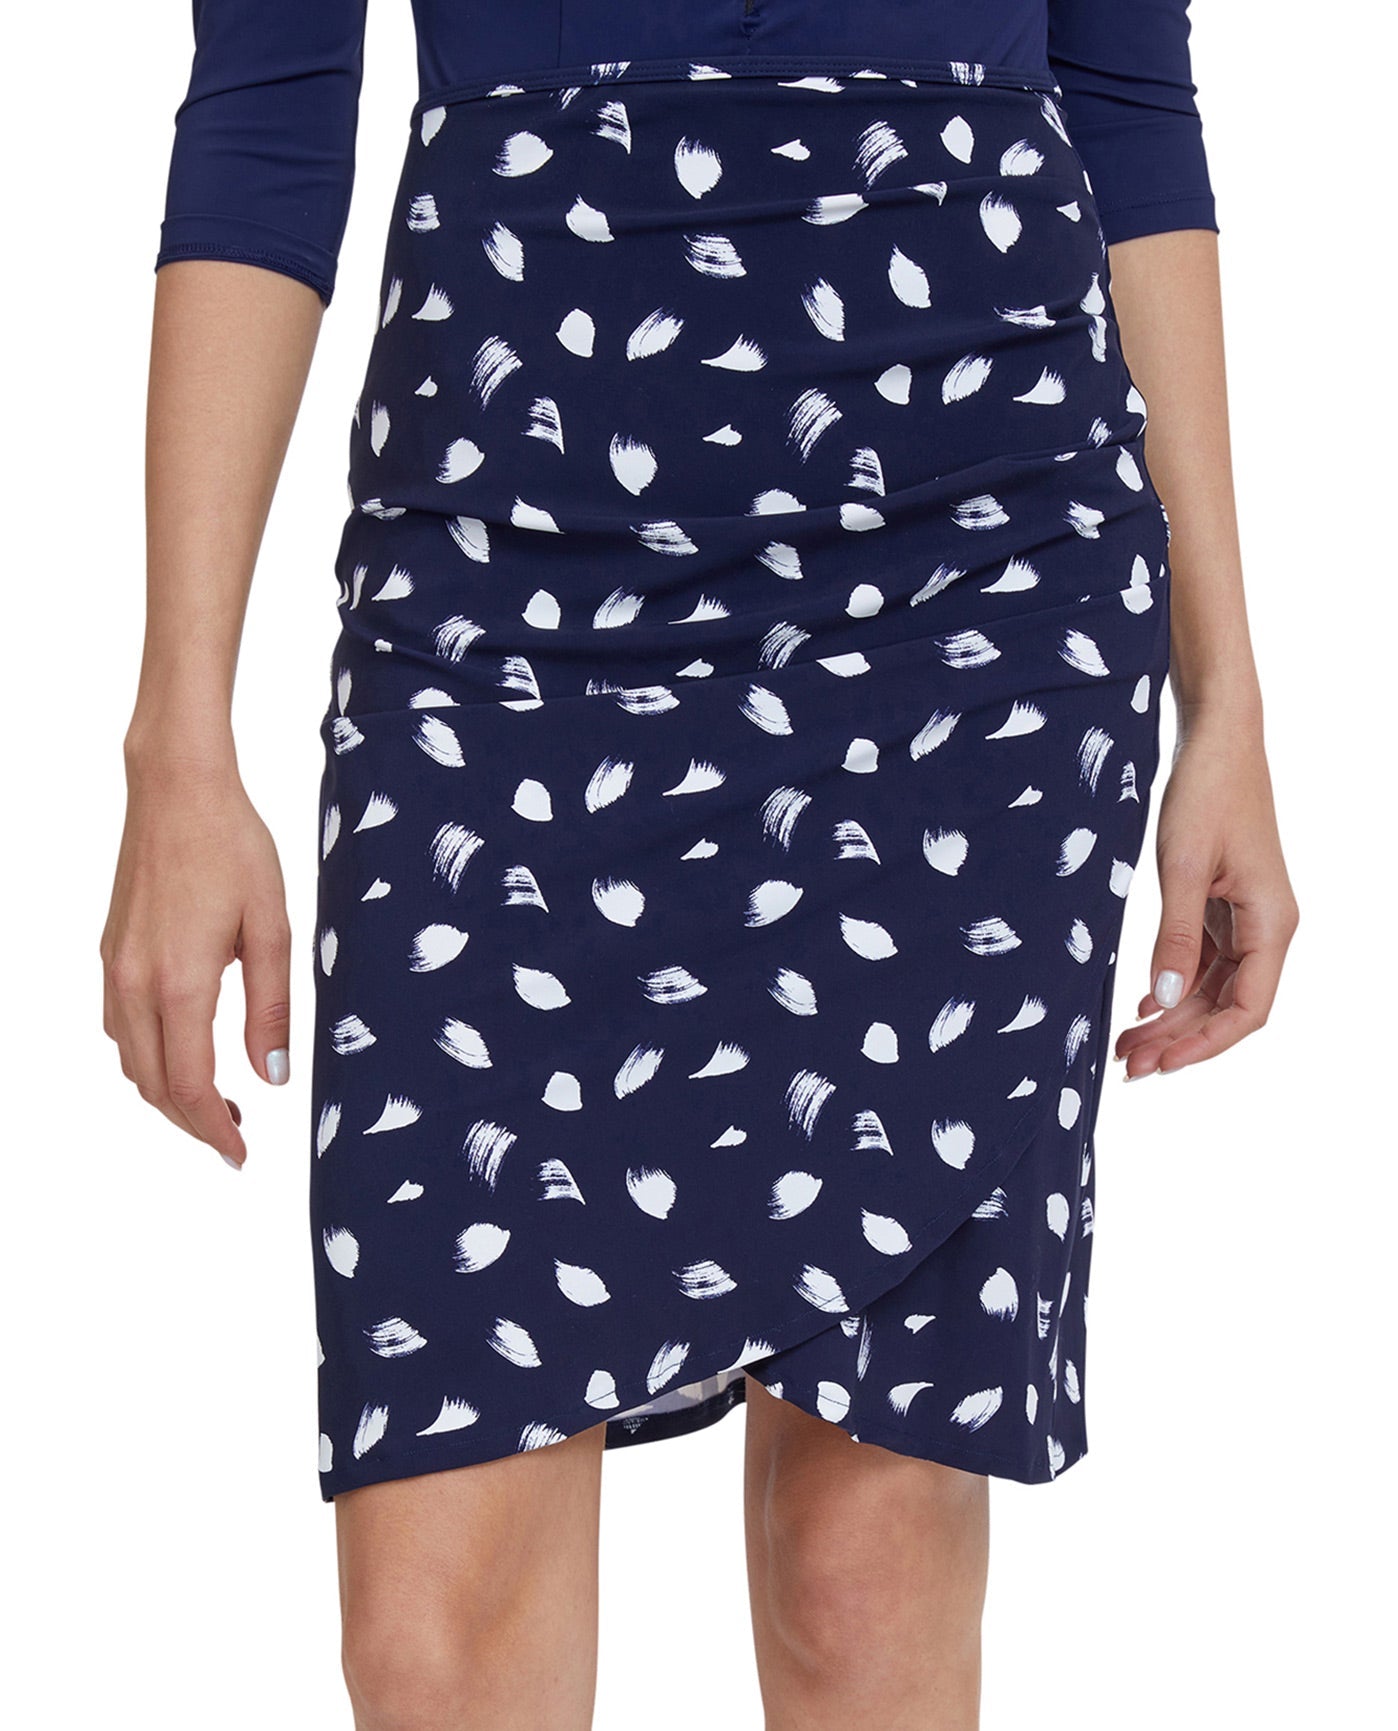 Front View Of Gottex Modest A-Line Surplice Skirt | GOTTEX MODEST NAVY AND WHITE